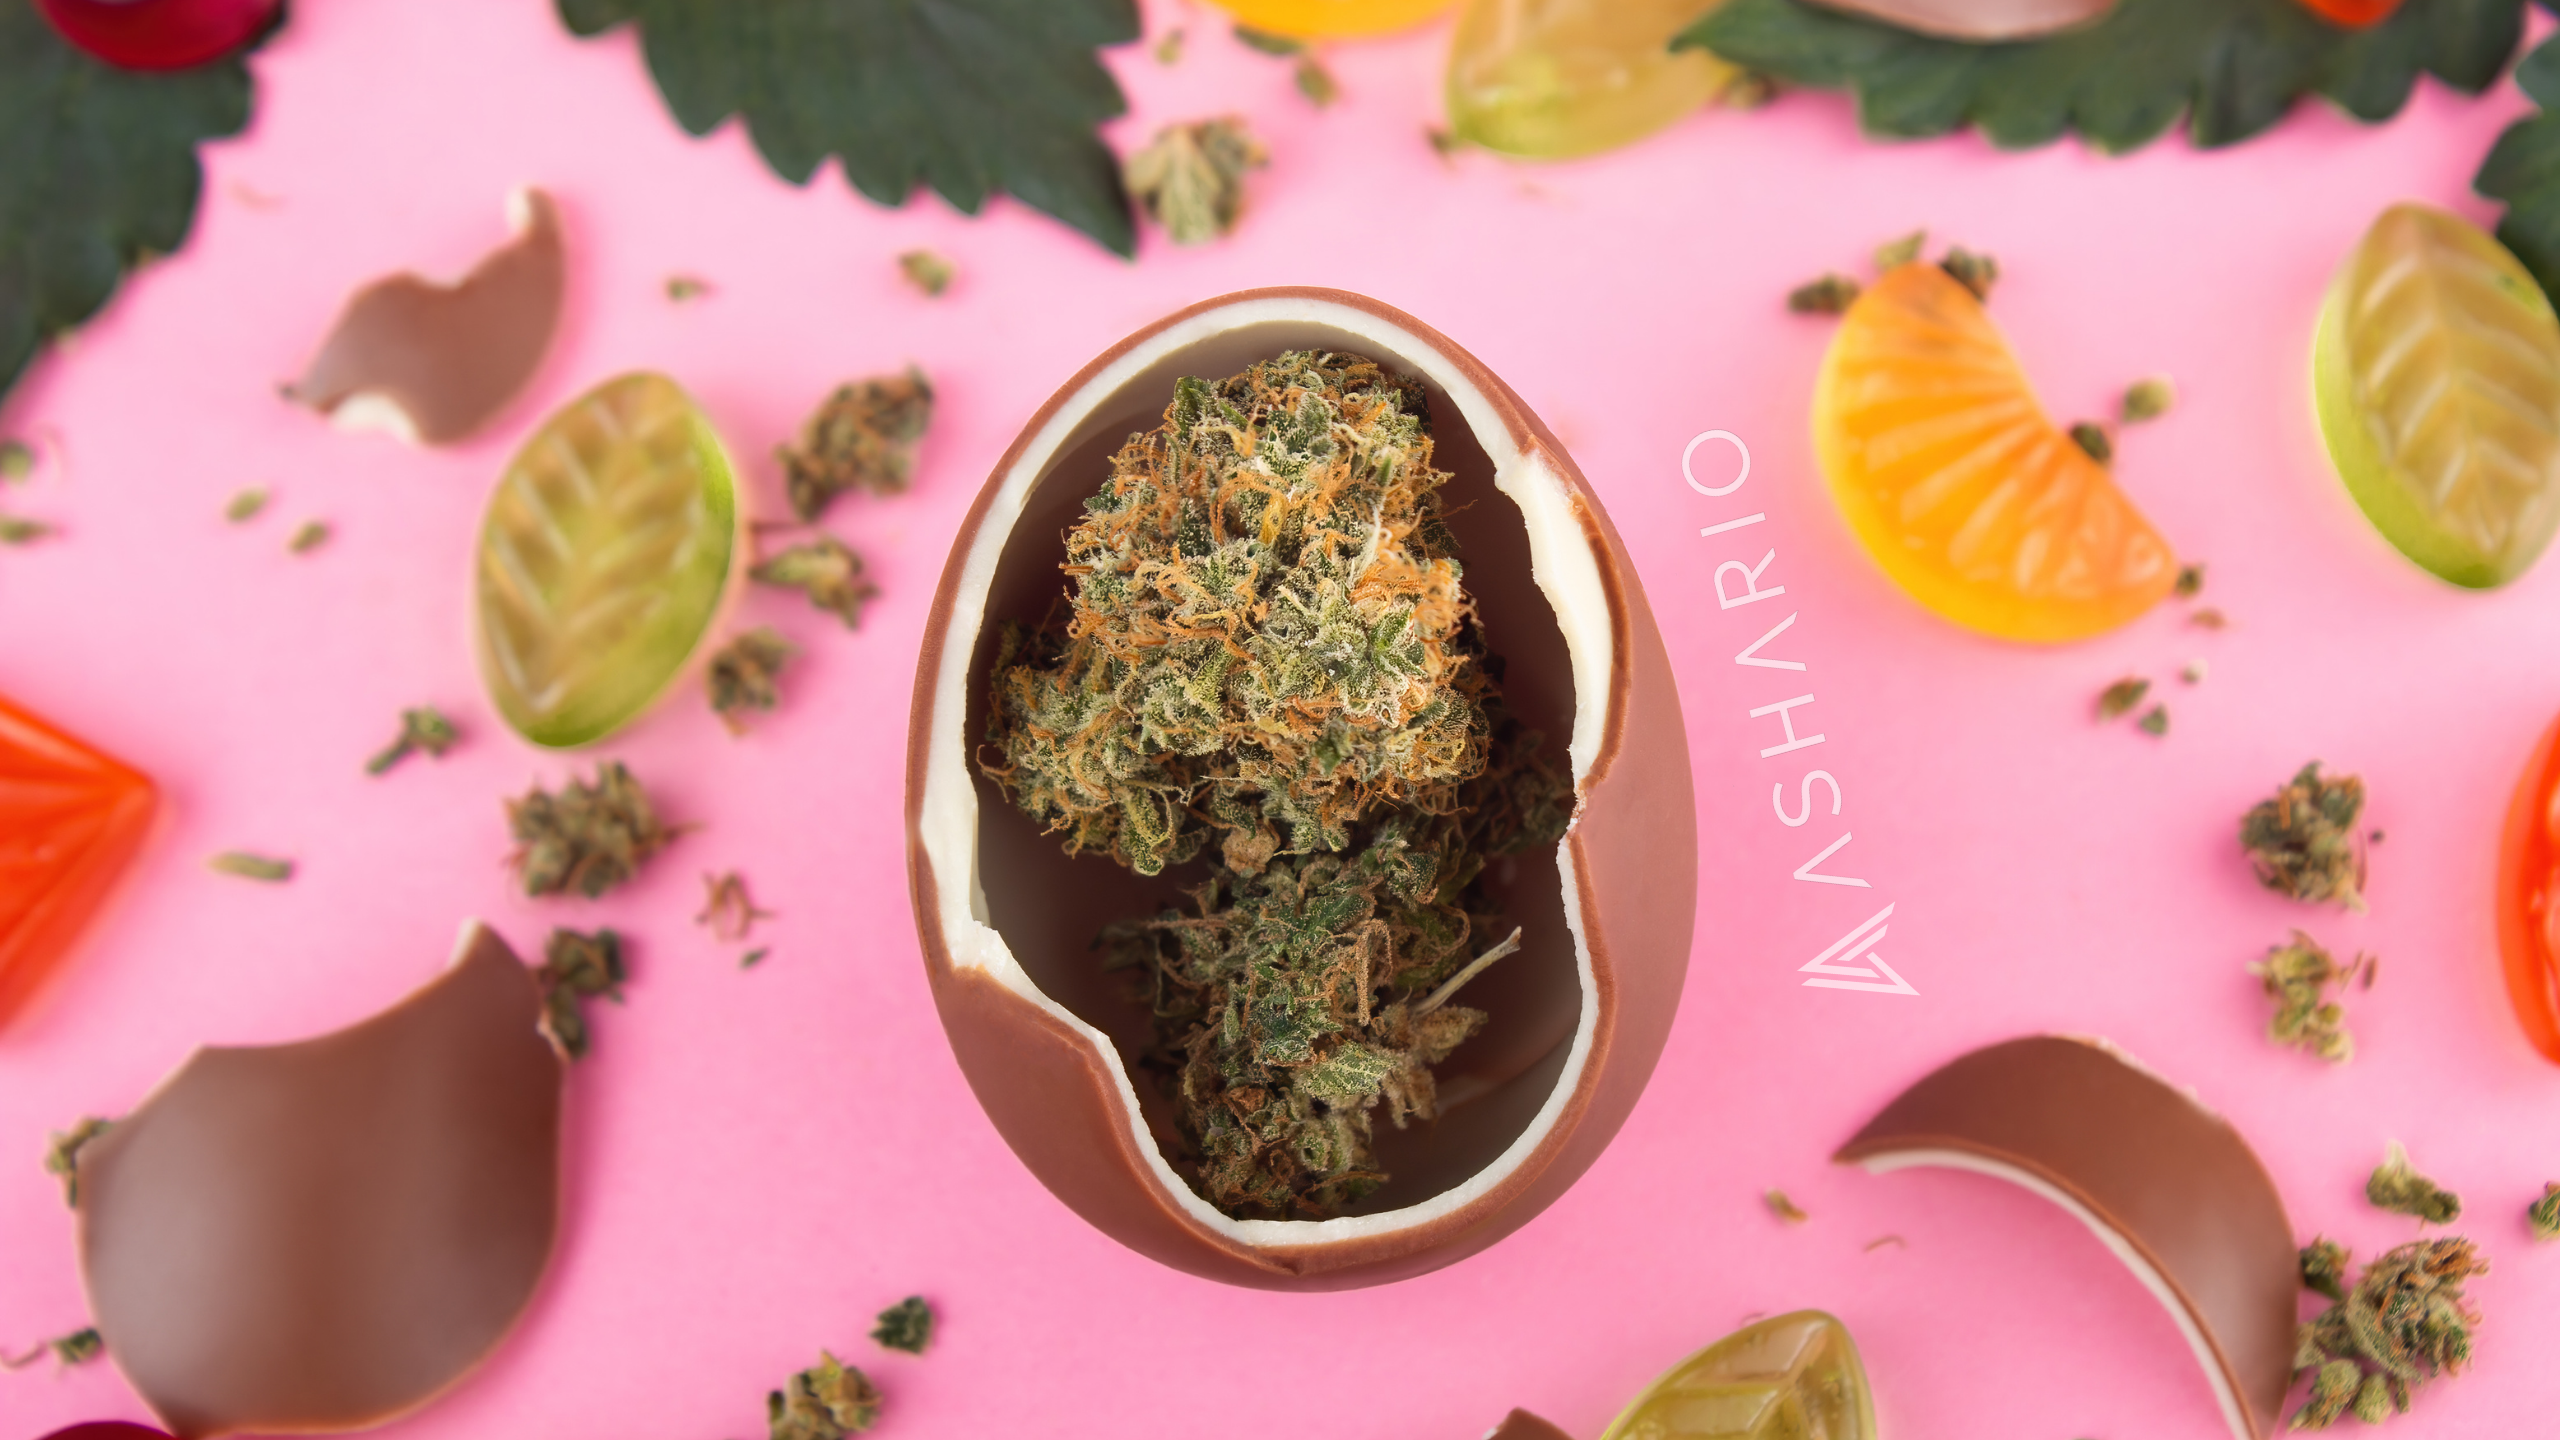 Indulge in the blissful experience of high THC edibles at Ashario Cannabis. Our curated selection offers a range of delicious treats infused with potent THC to elevate your cannabis experience.